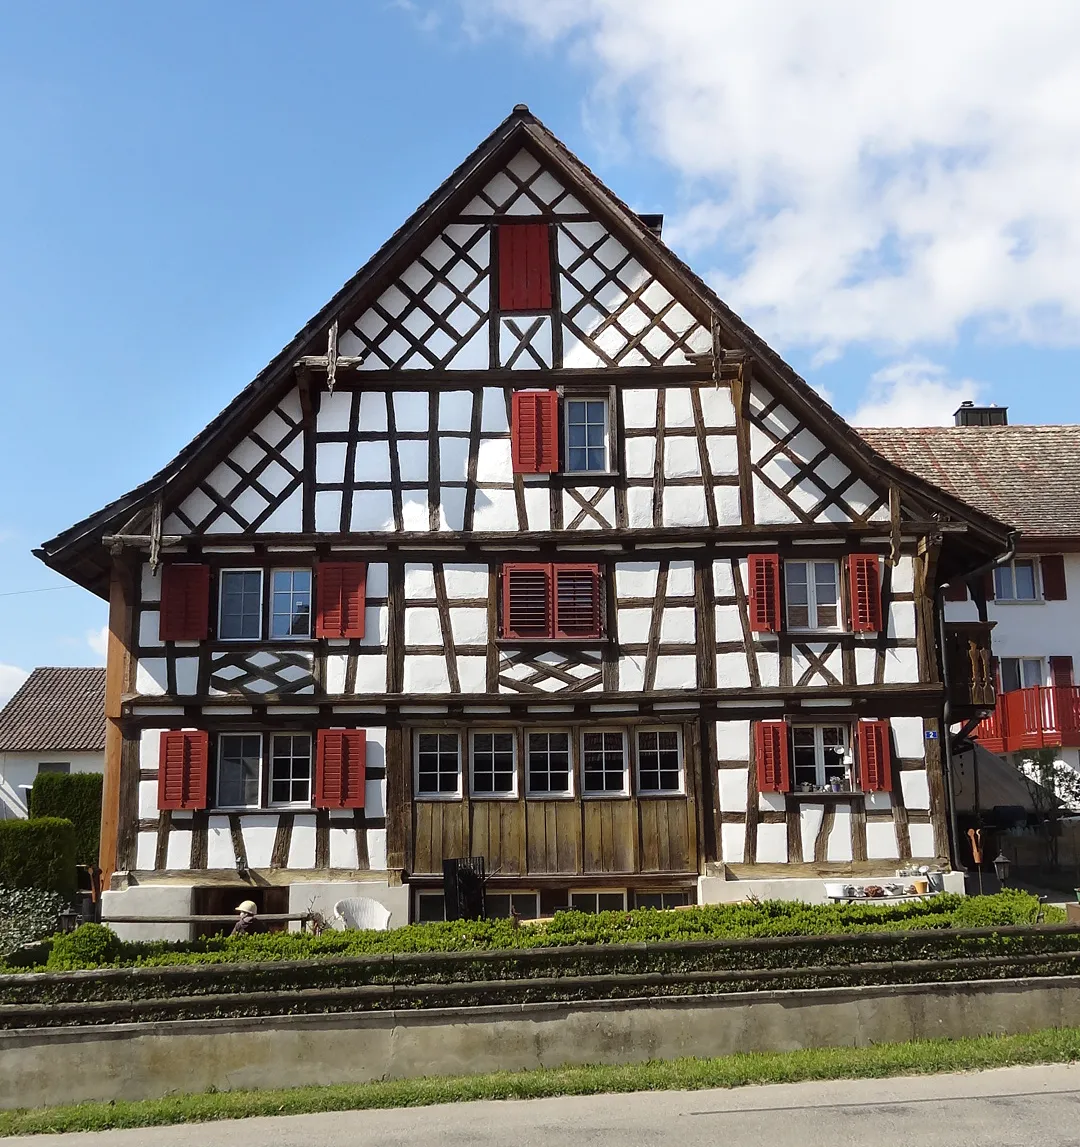 Photo showing: Timber framed houses in the canton of Thurgau